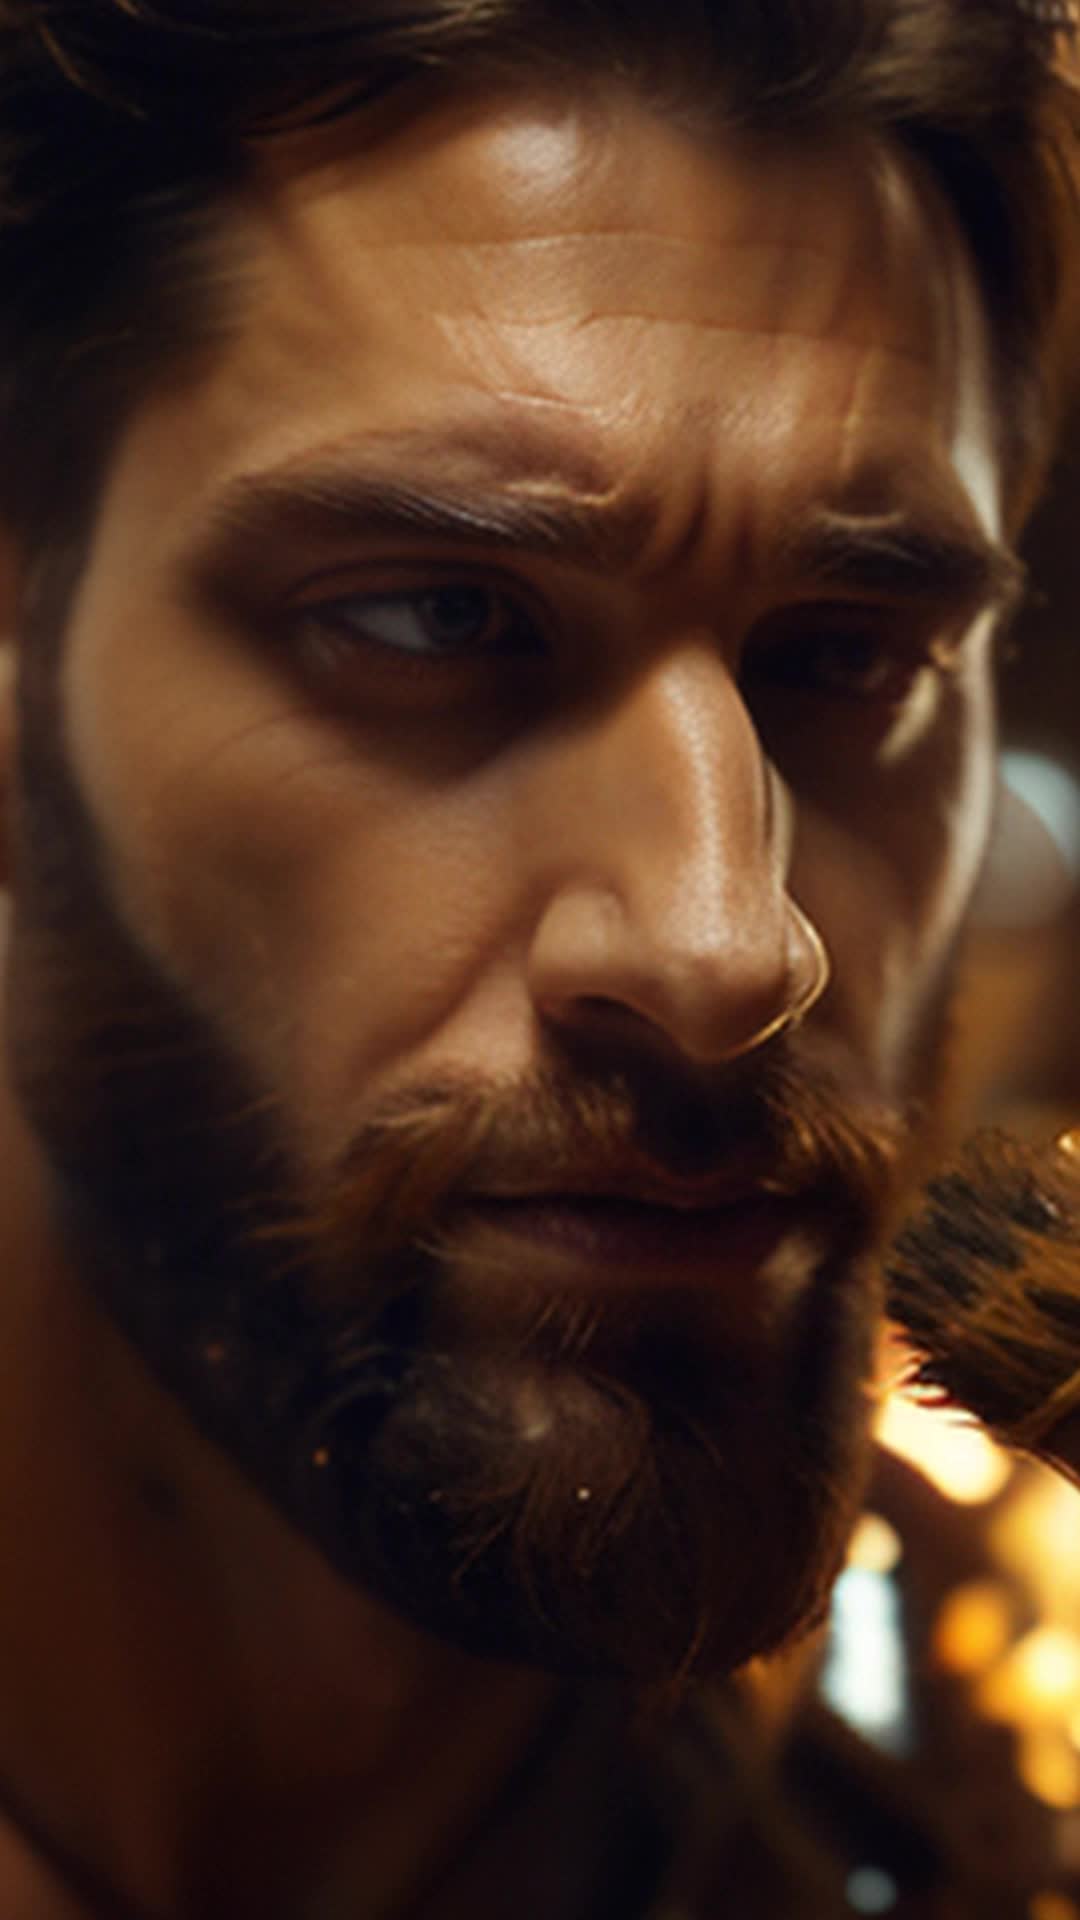 Tim applying Beardly beard oil, vigorous rubbing, close-up of hands working oil into beard bristles, detailed texture of beard, soft-focused background, warm lighting accentuating the shine